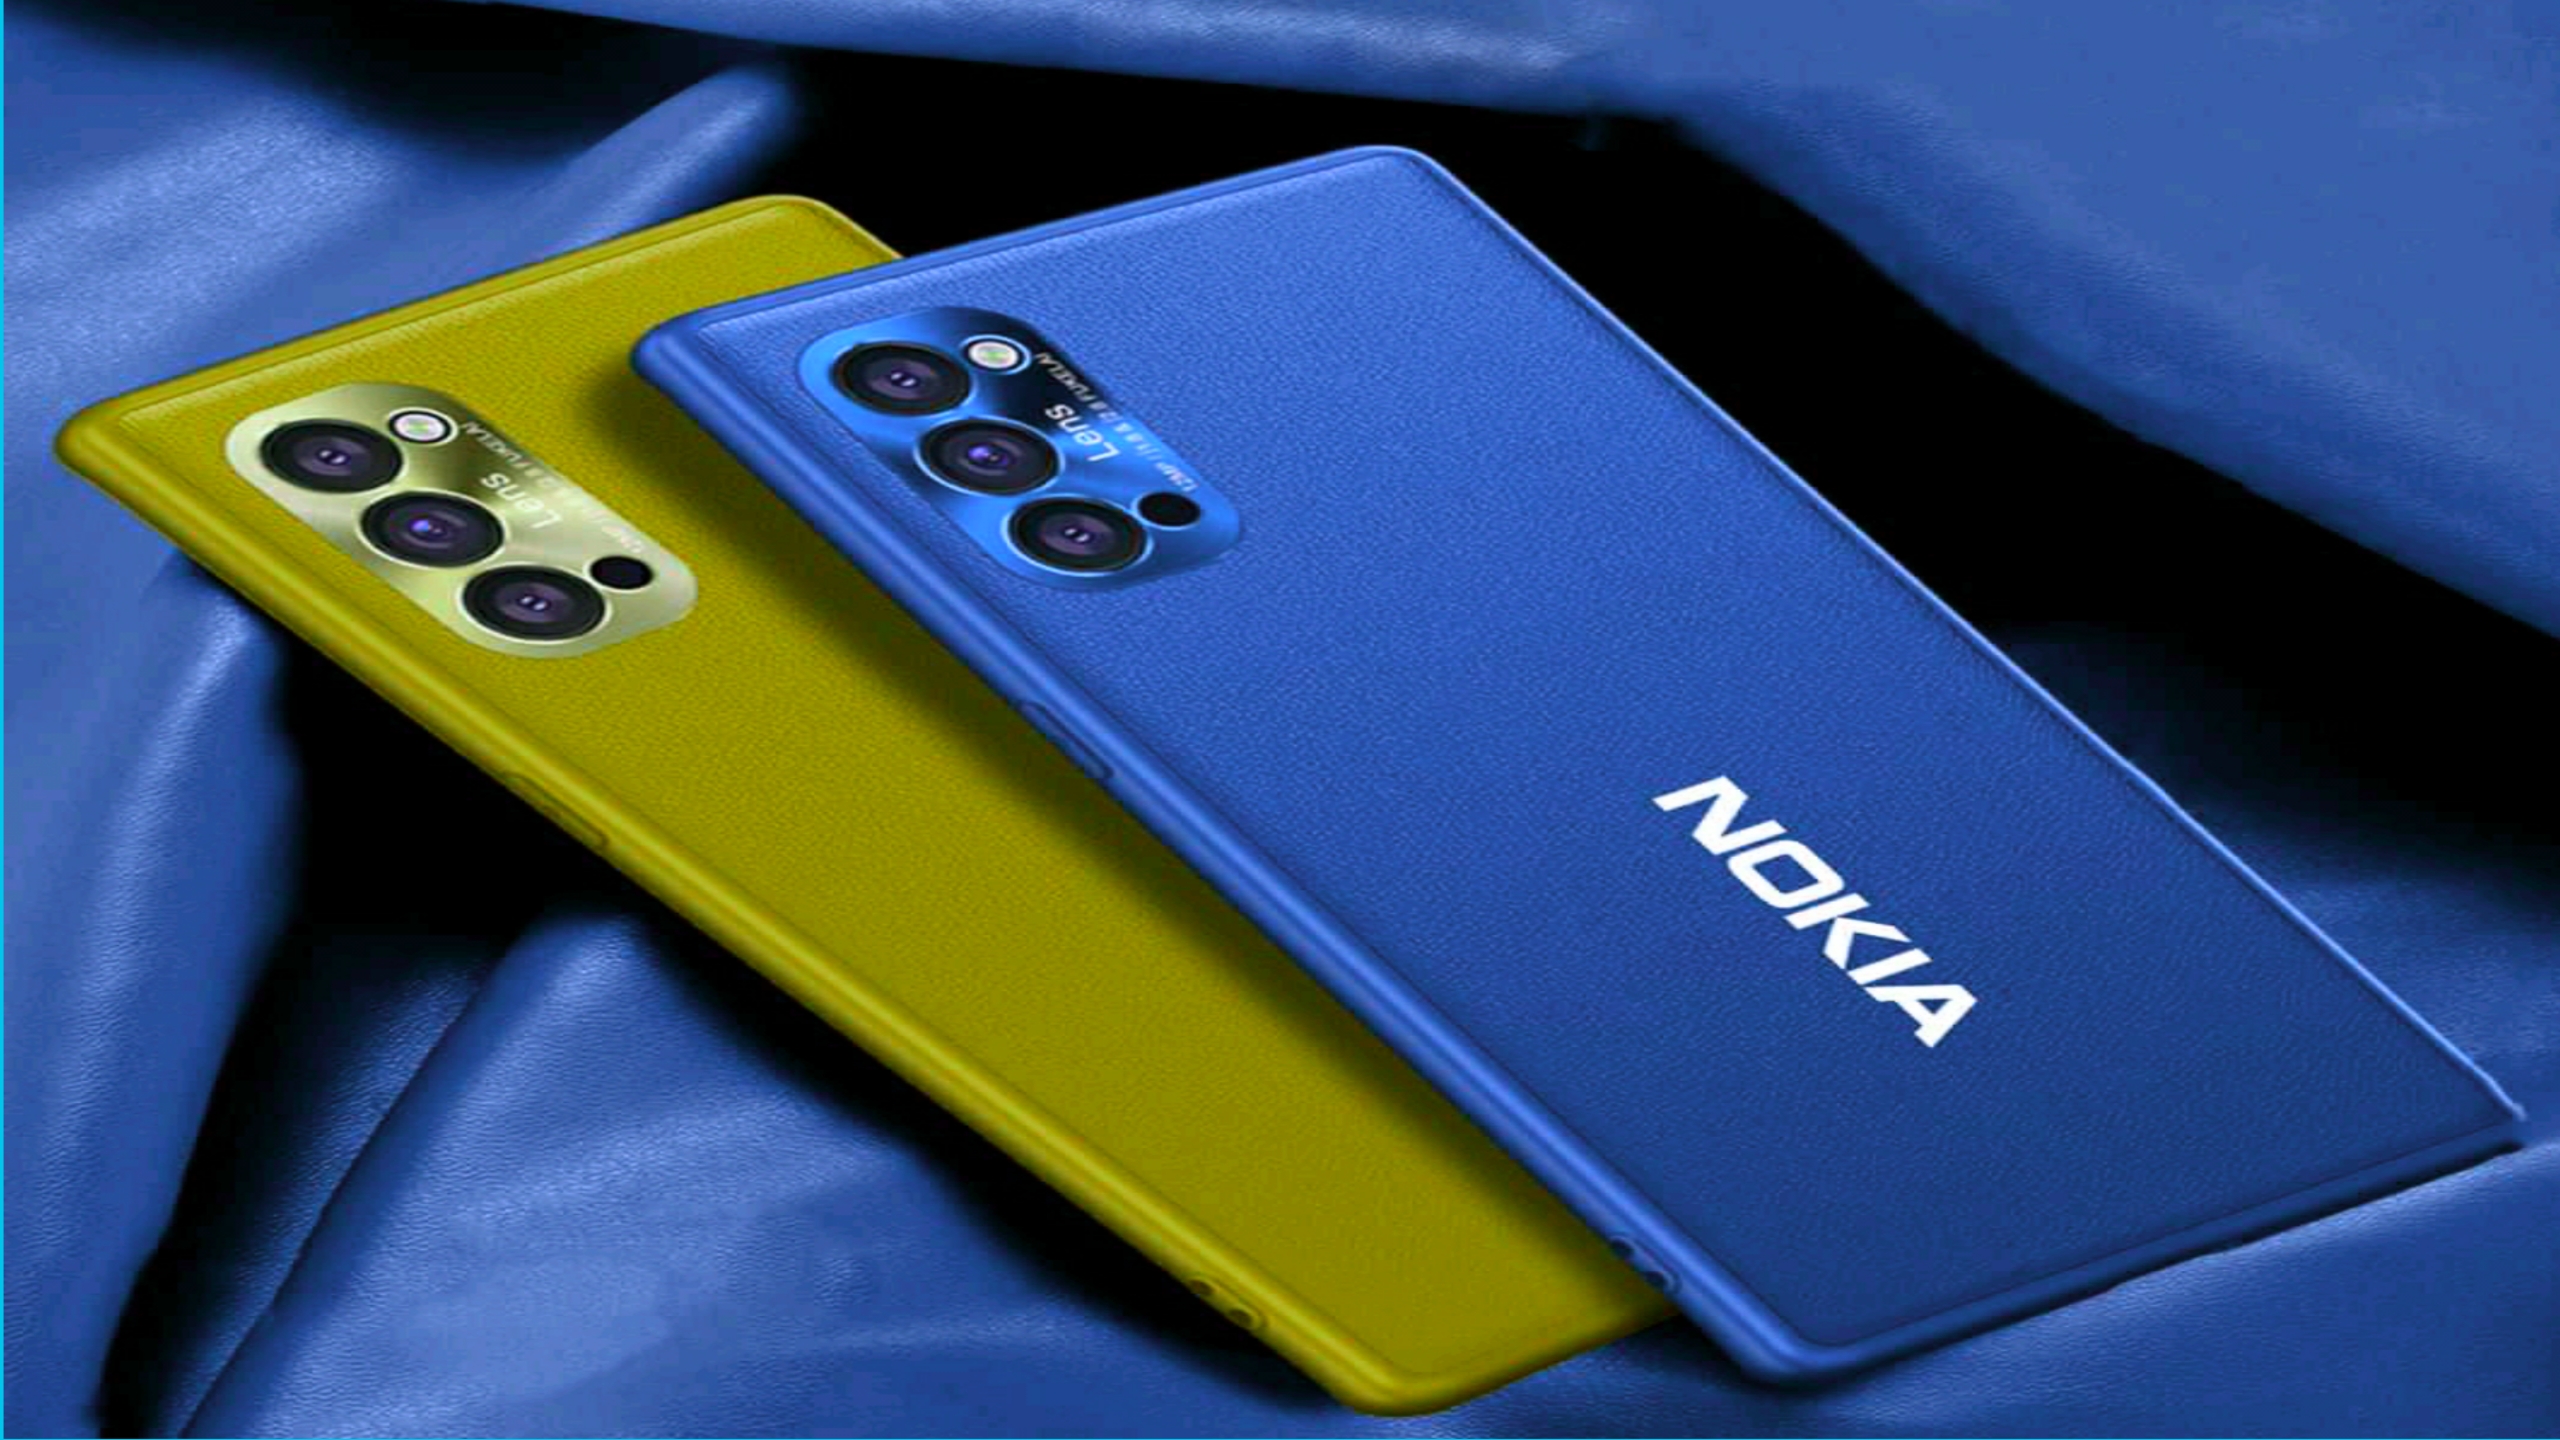 Nokia Edge Ultra 2021: Specifications, Price, and Latest News!